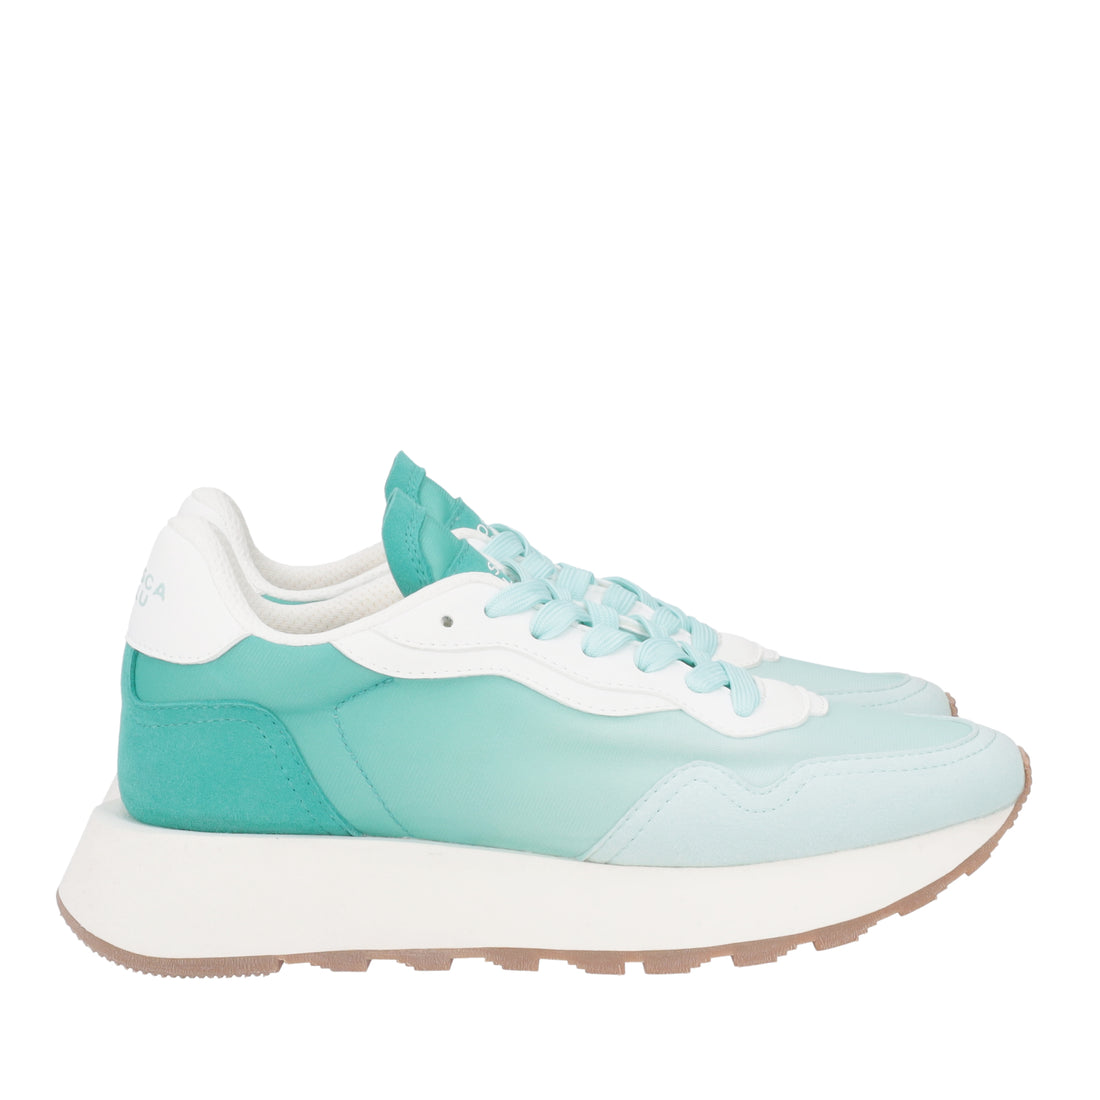 LIGHT BLUE ALBA SNEAKERS WITH SHADED EFFECT